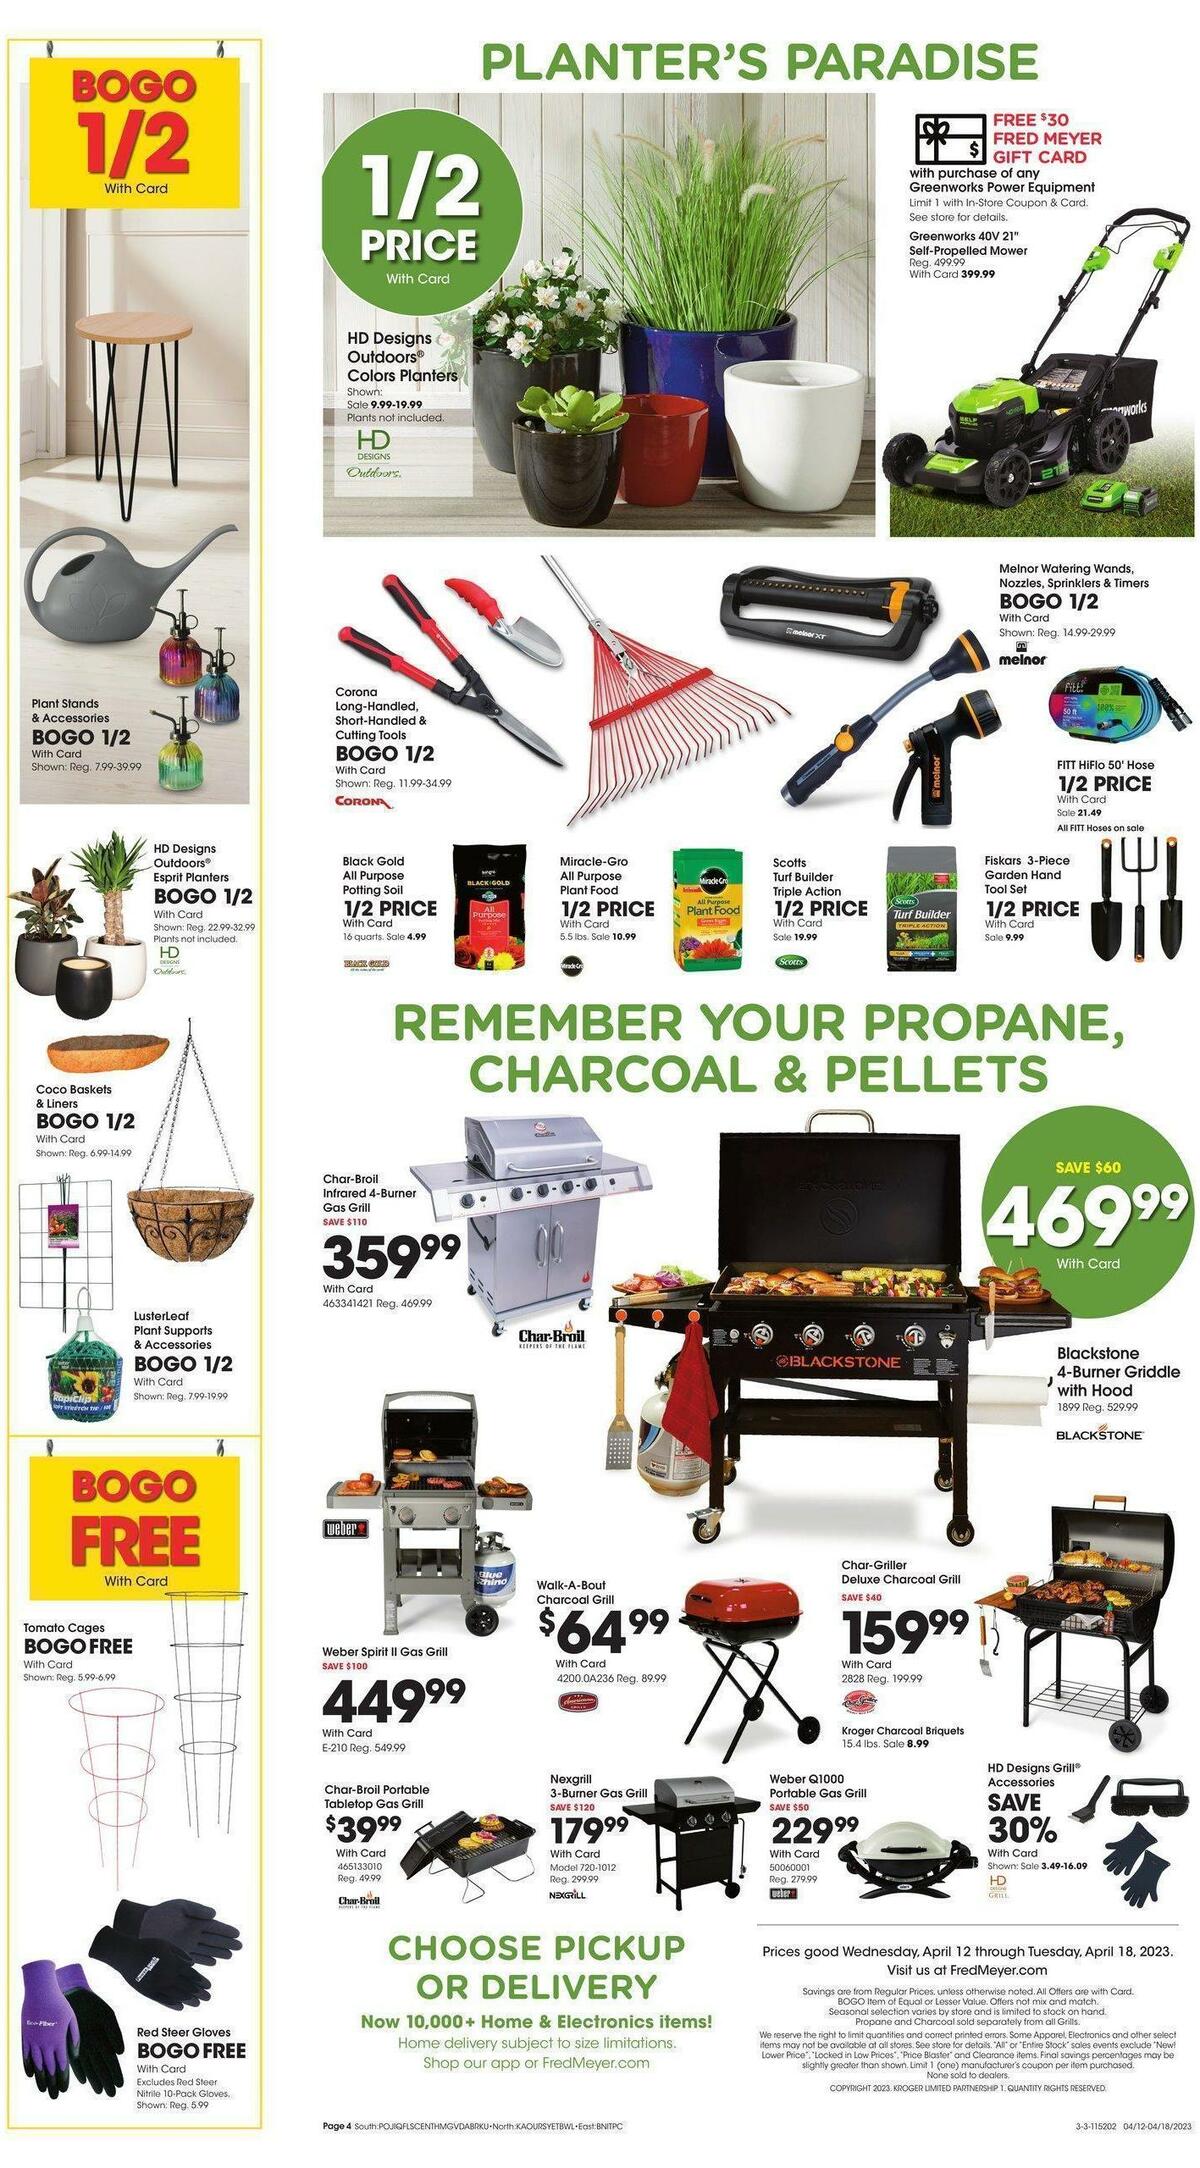 Fred Meyer Garden Weekly Ad from April 12